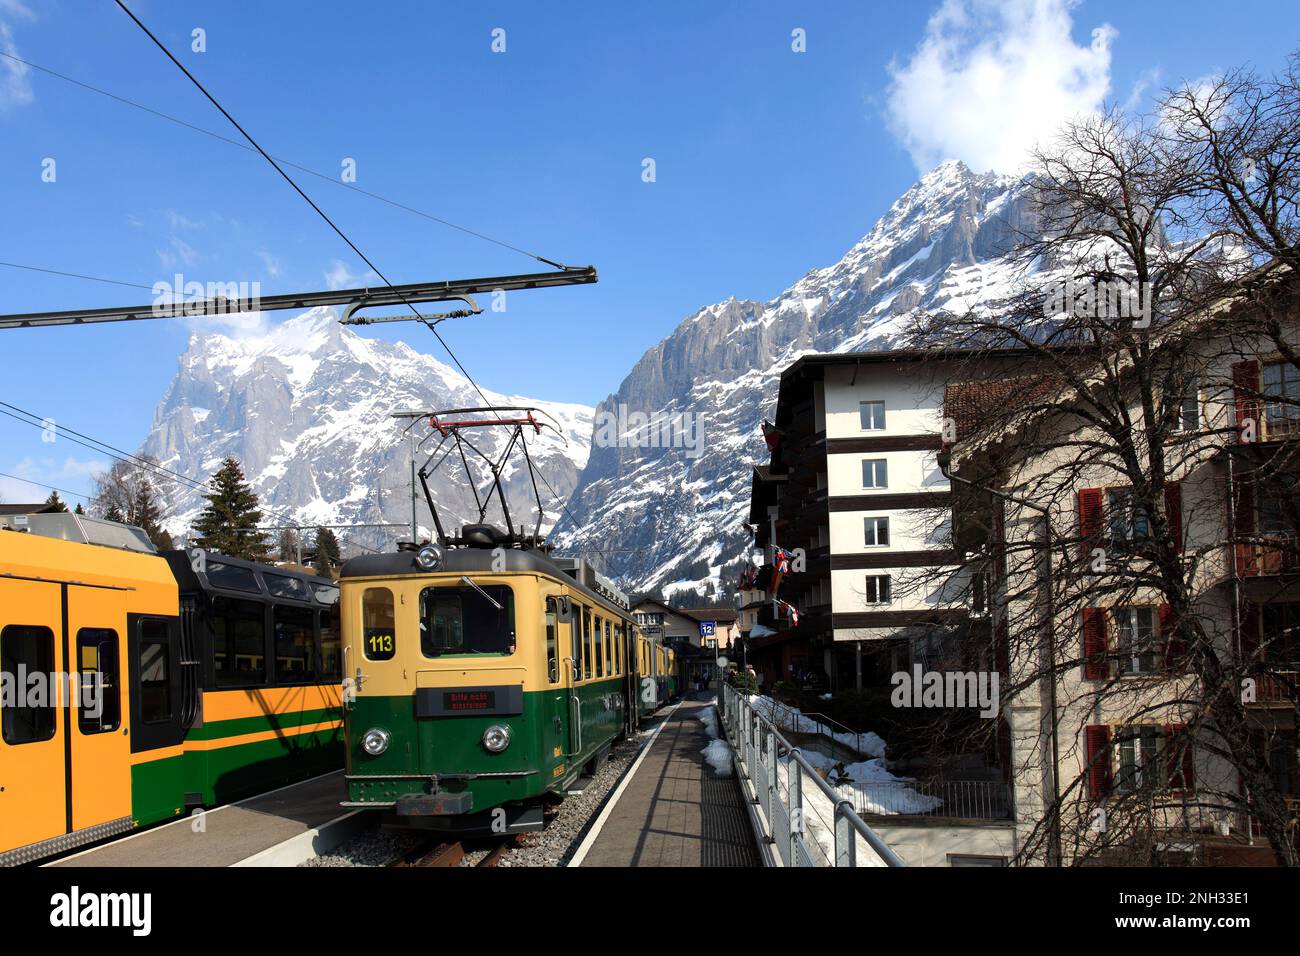 Swiss trains in the station at the ski resort of Grindelwald, Swiss Alps, Jungfrau - Aletsch; Bernese Oberland; Switzerland; Europe Stock Photo